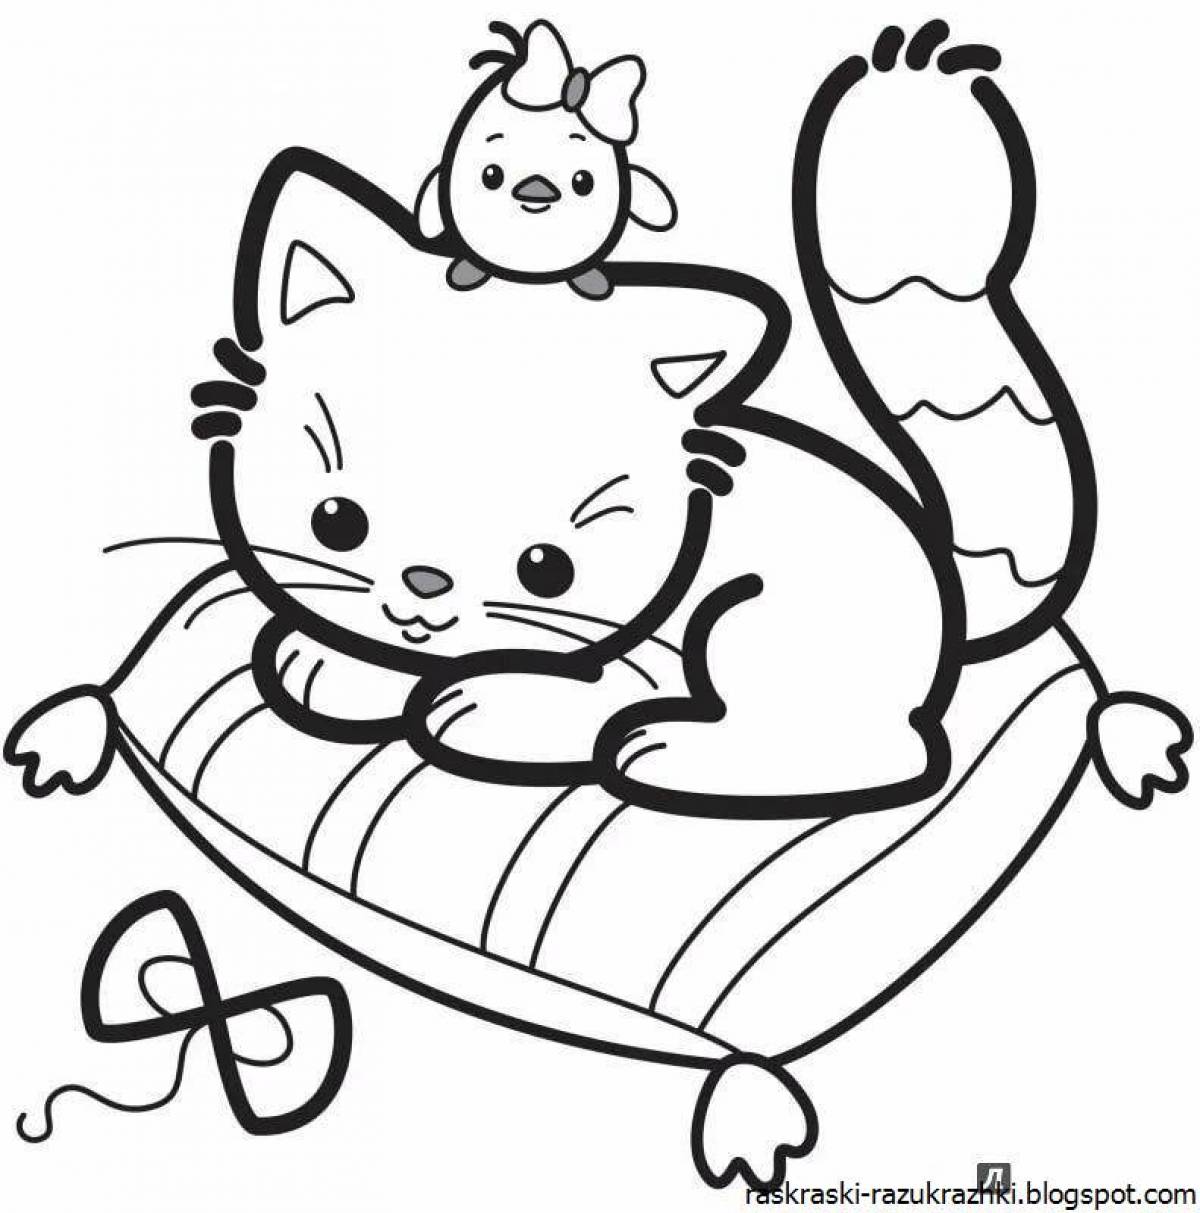 Soft-haired kitten coloring book for children